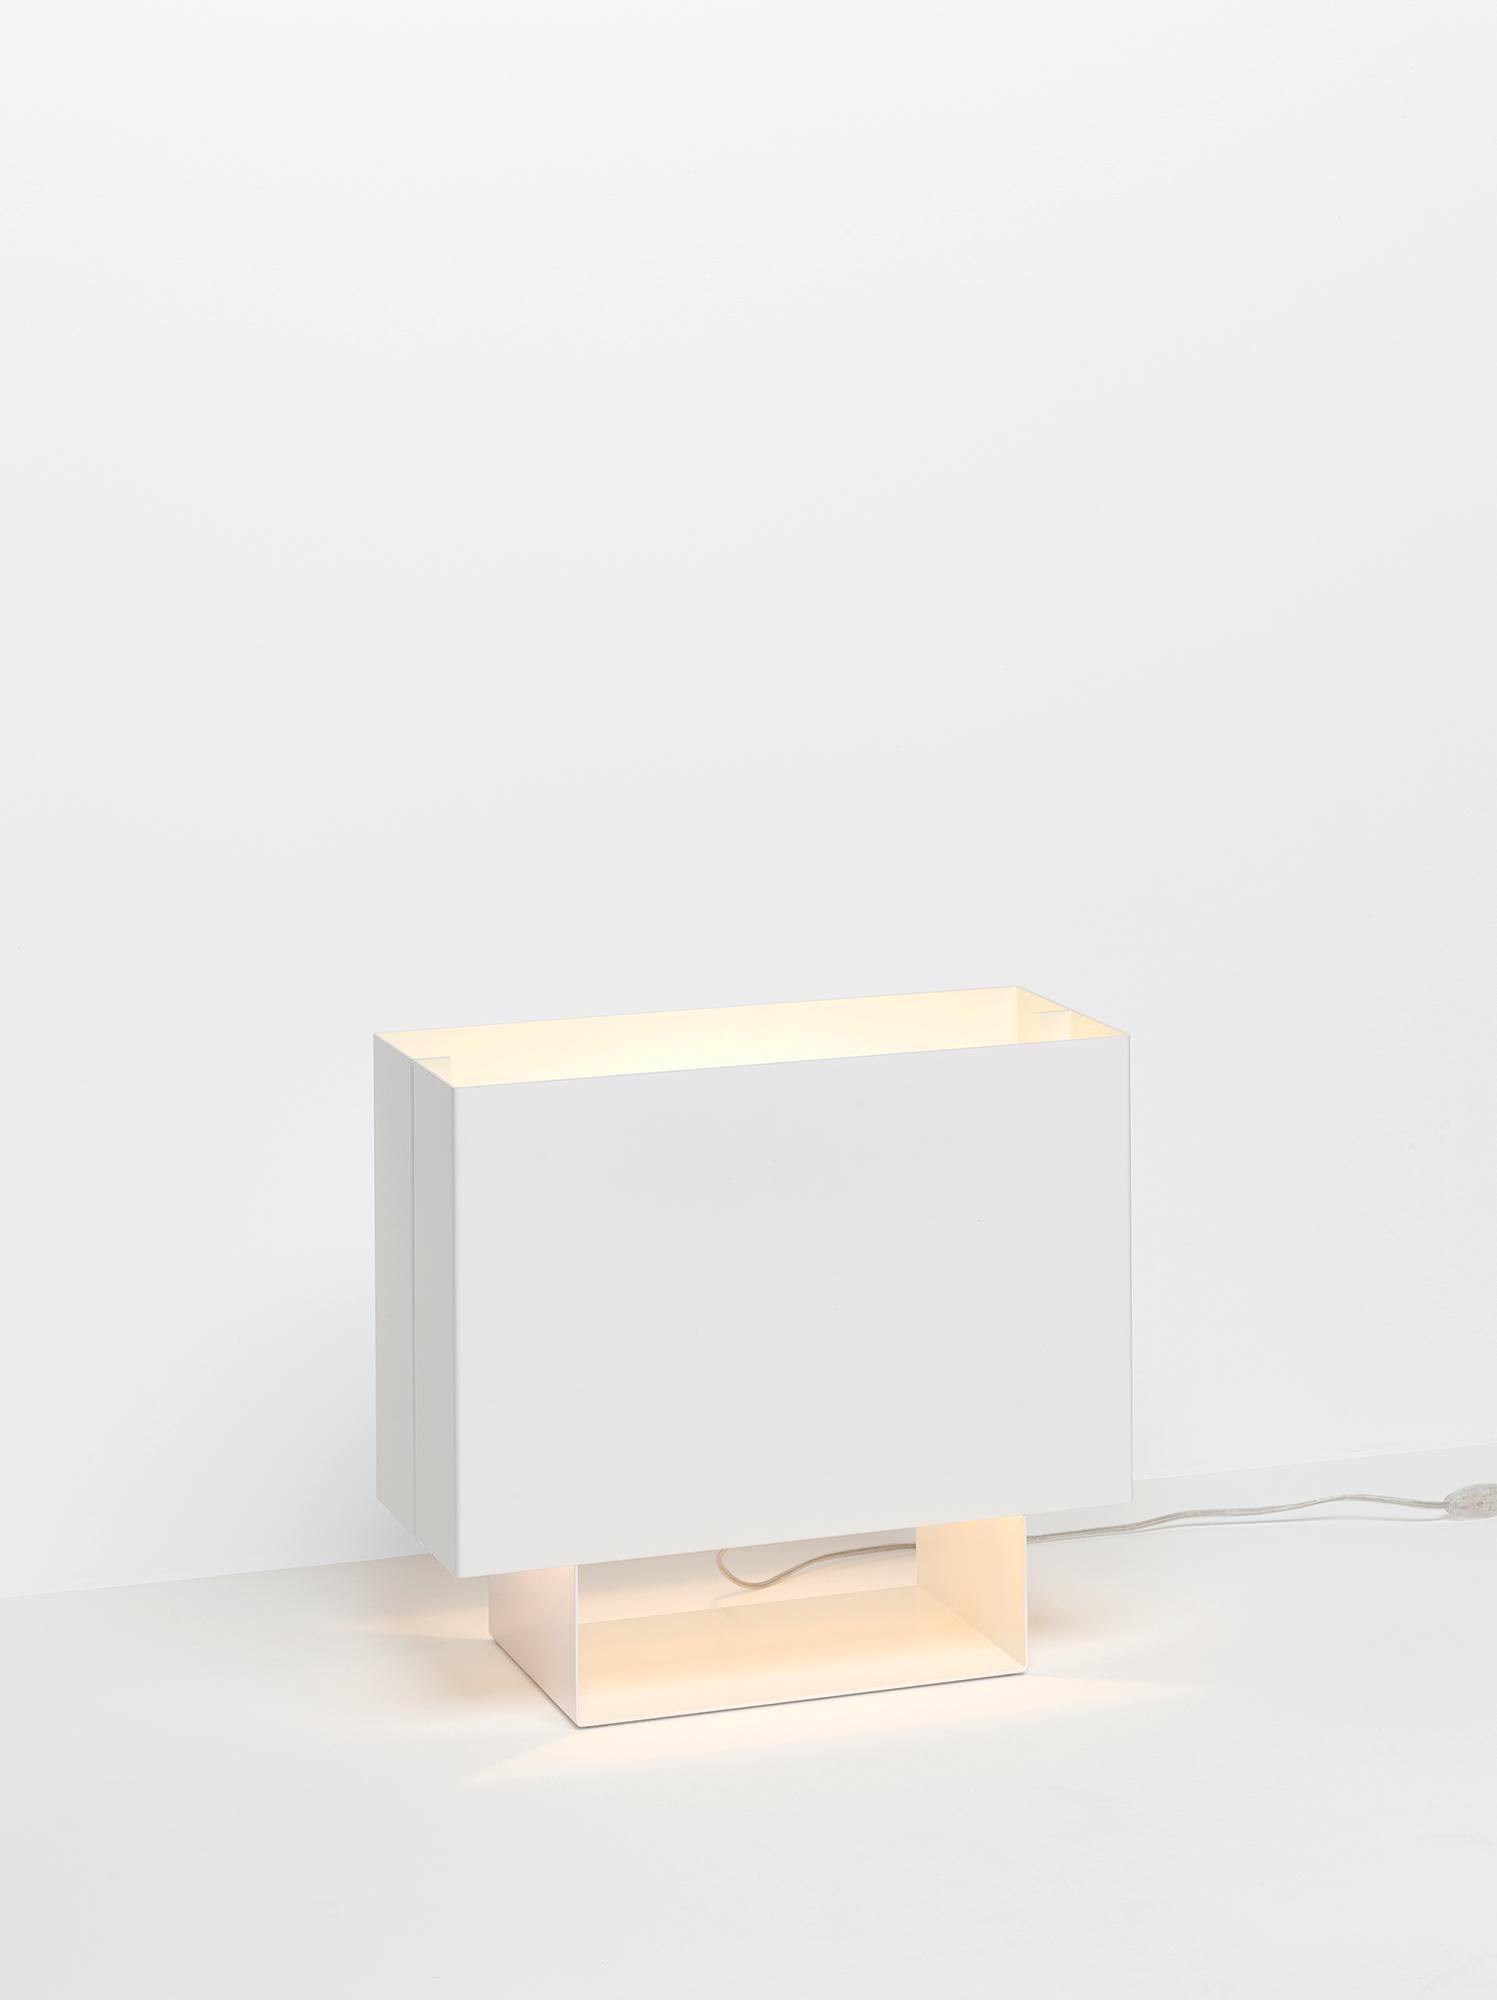 The light seam one is a modern interpretation of a Classic table light. Made of three firmly bonded components of powder-coated, folded sheet aluminum, the number of parts has been reduced to the essentials to provide the strongest focus on the